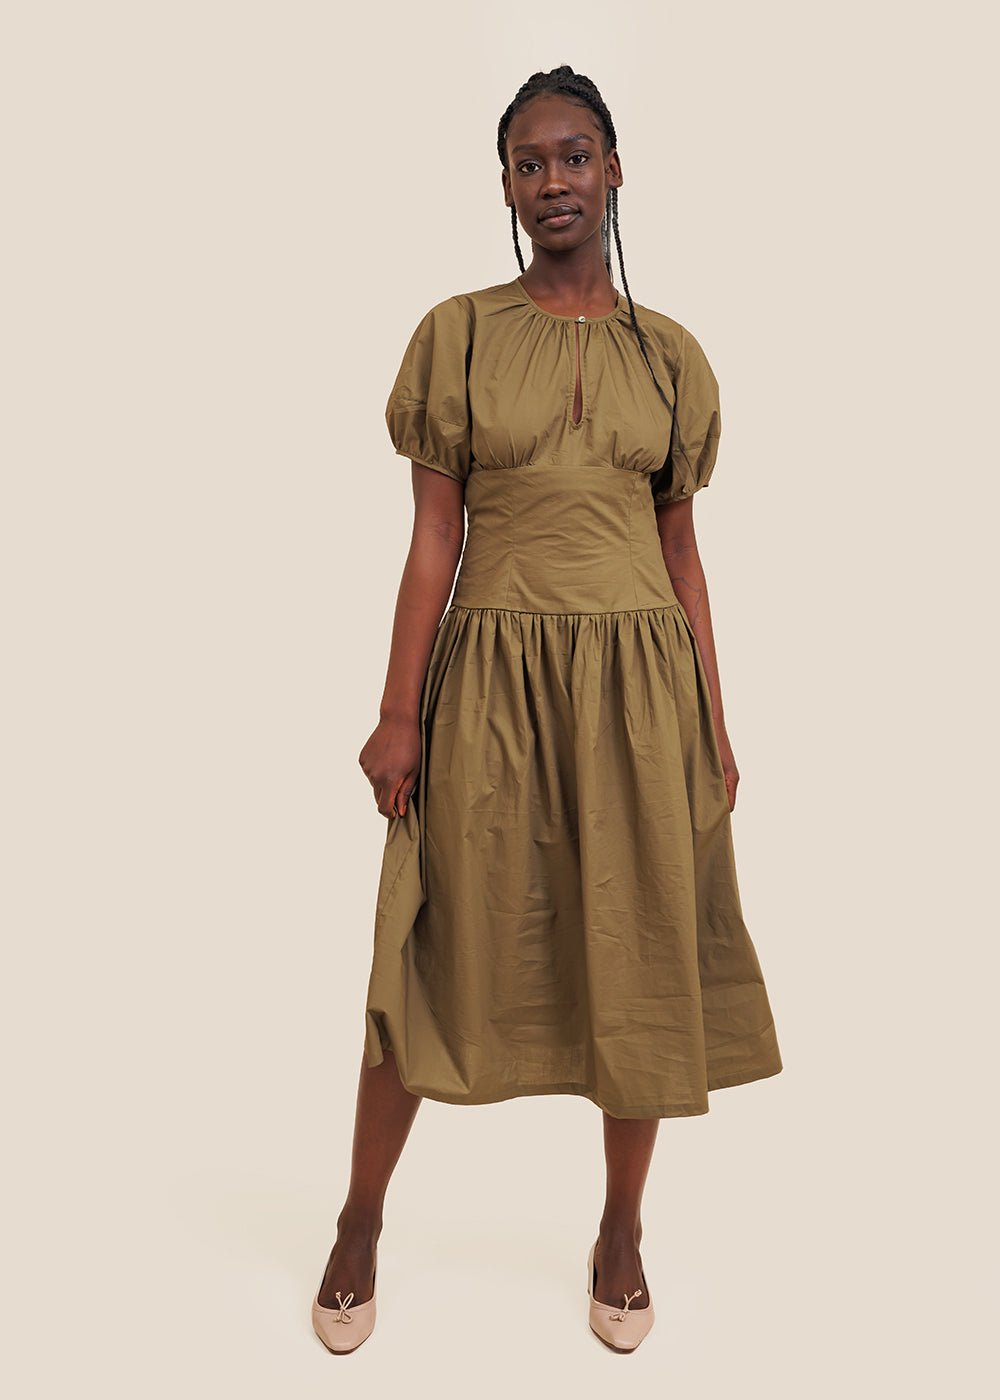 Quality Unisex Vintage Material for Shirt, Gown, Jumpsuit, and More